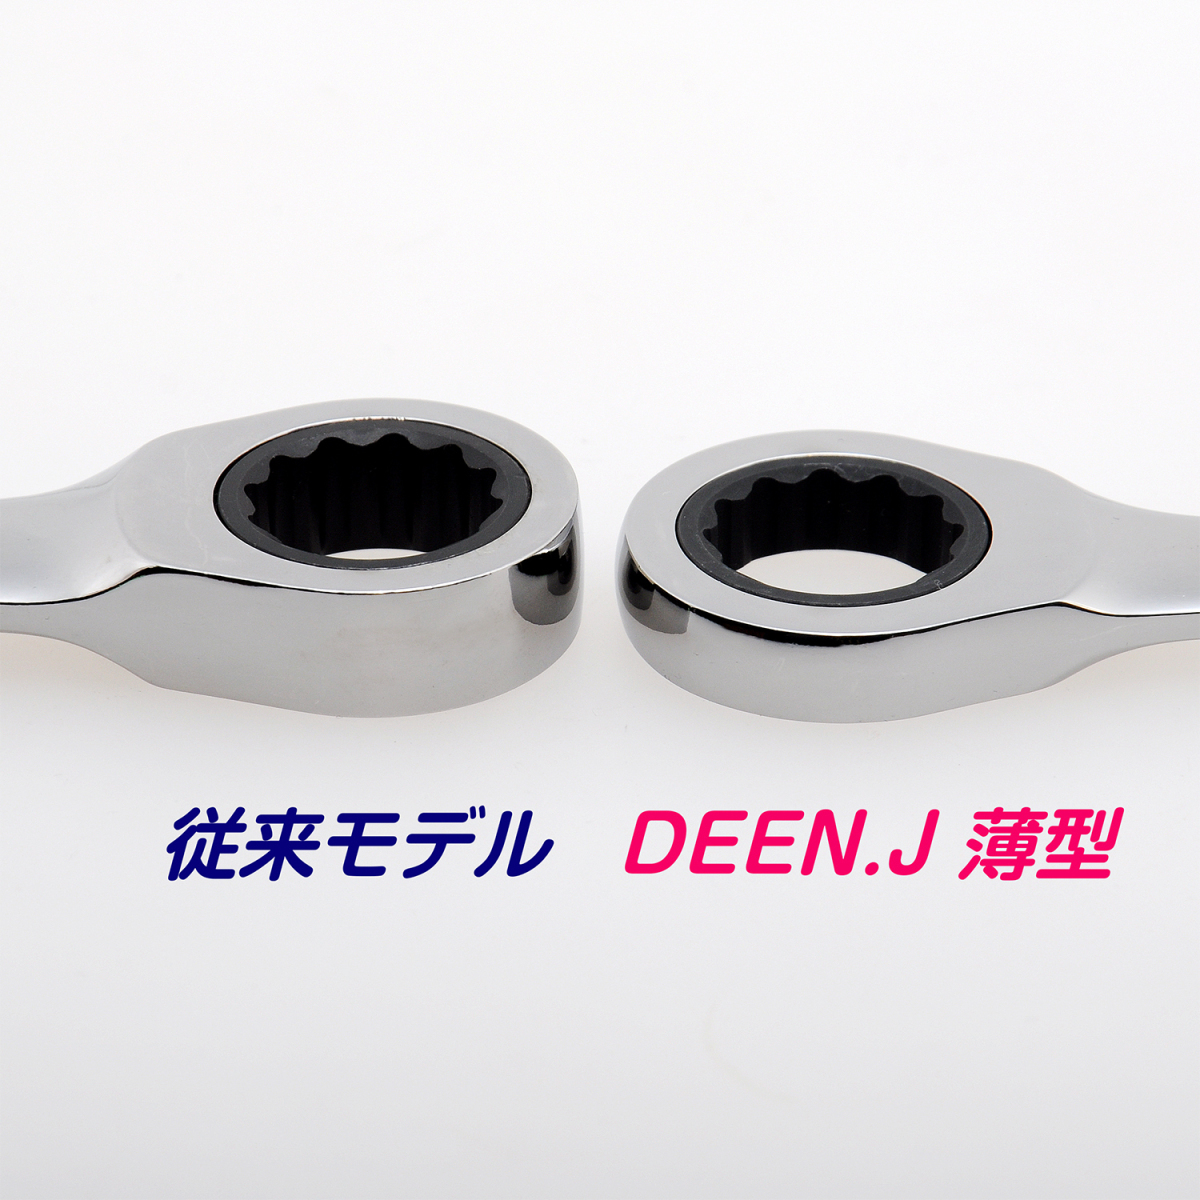 DEEN.J thin type ratchet glasses wrench 13mm